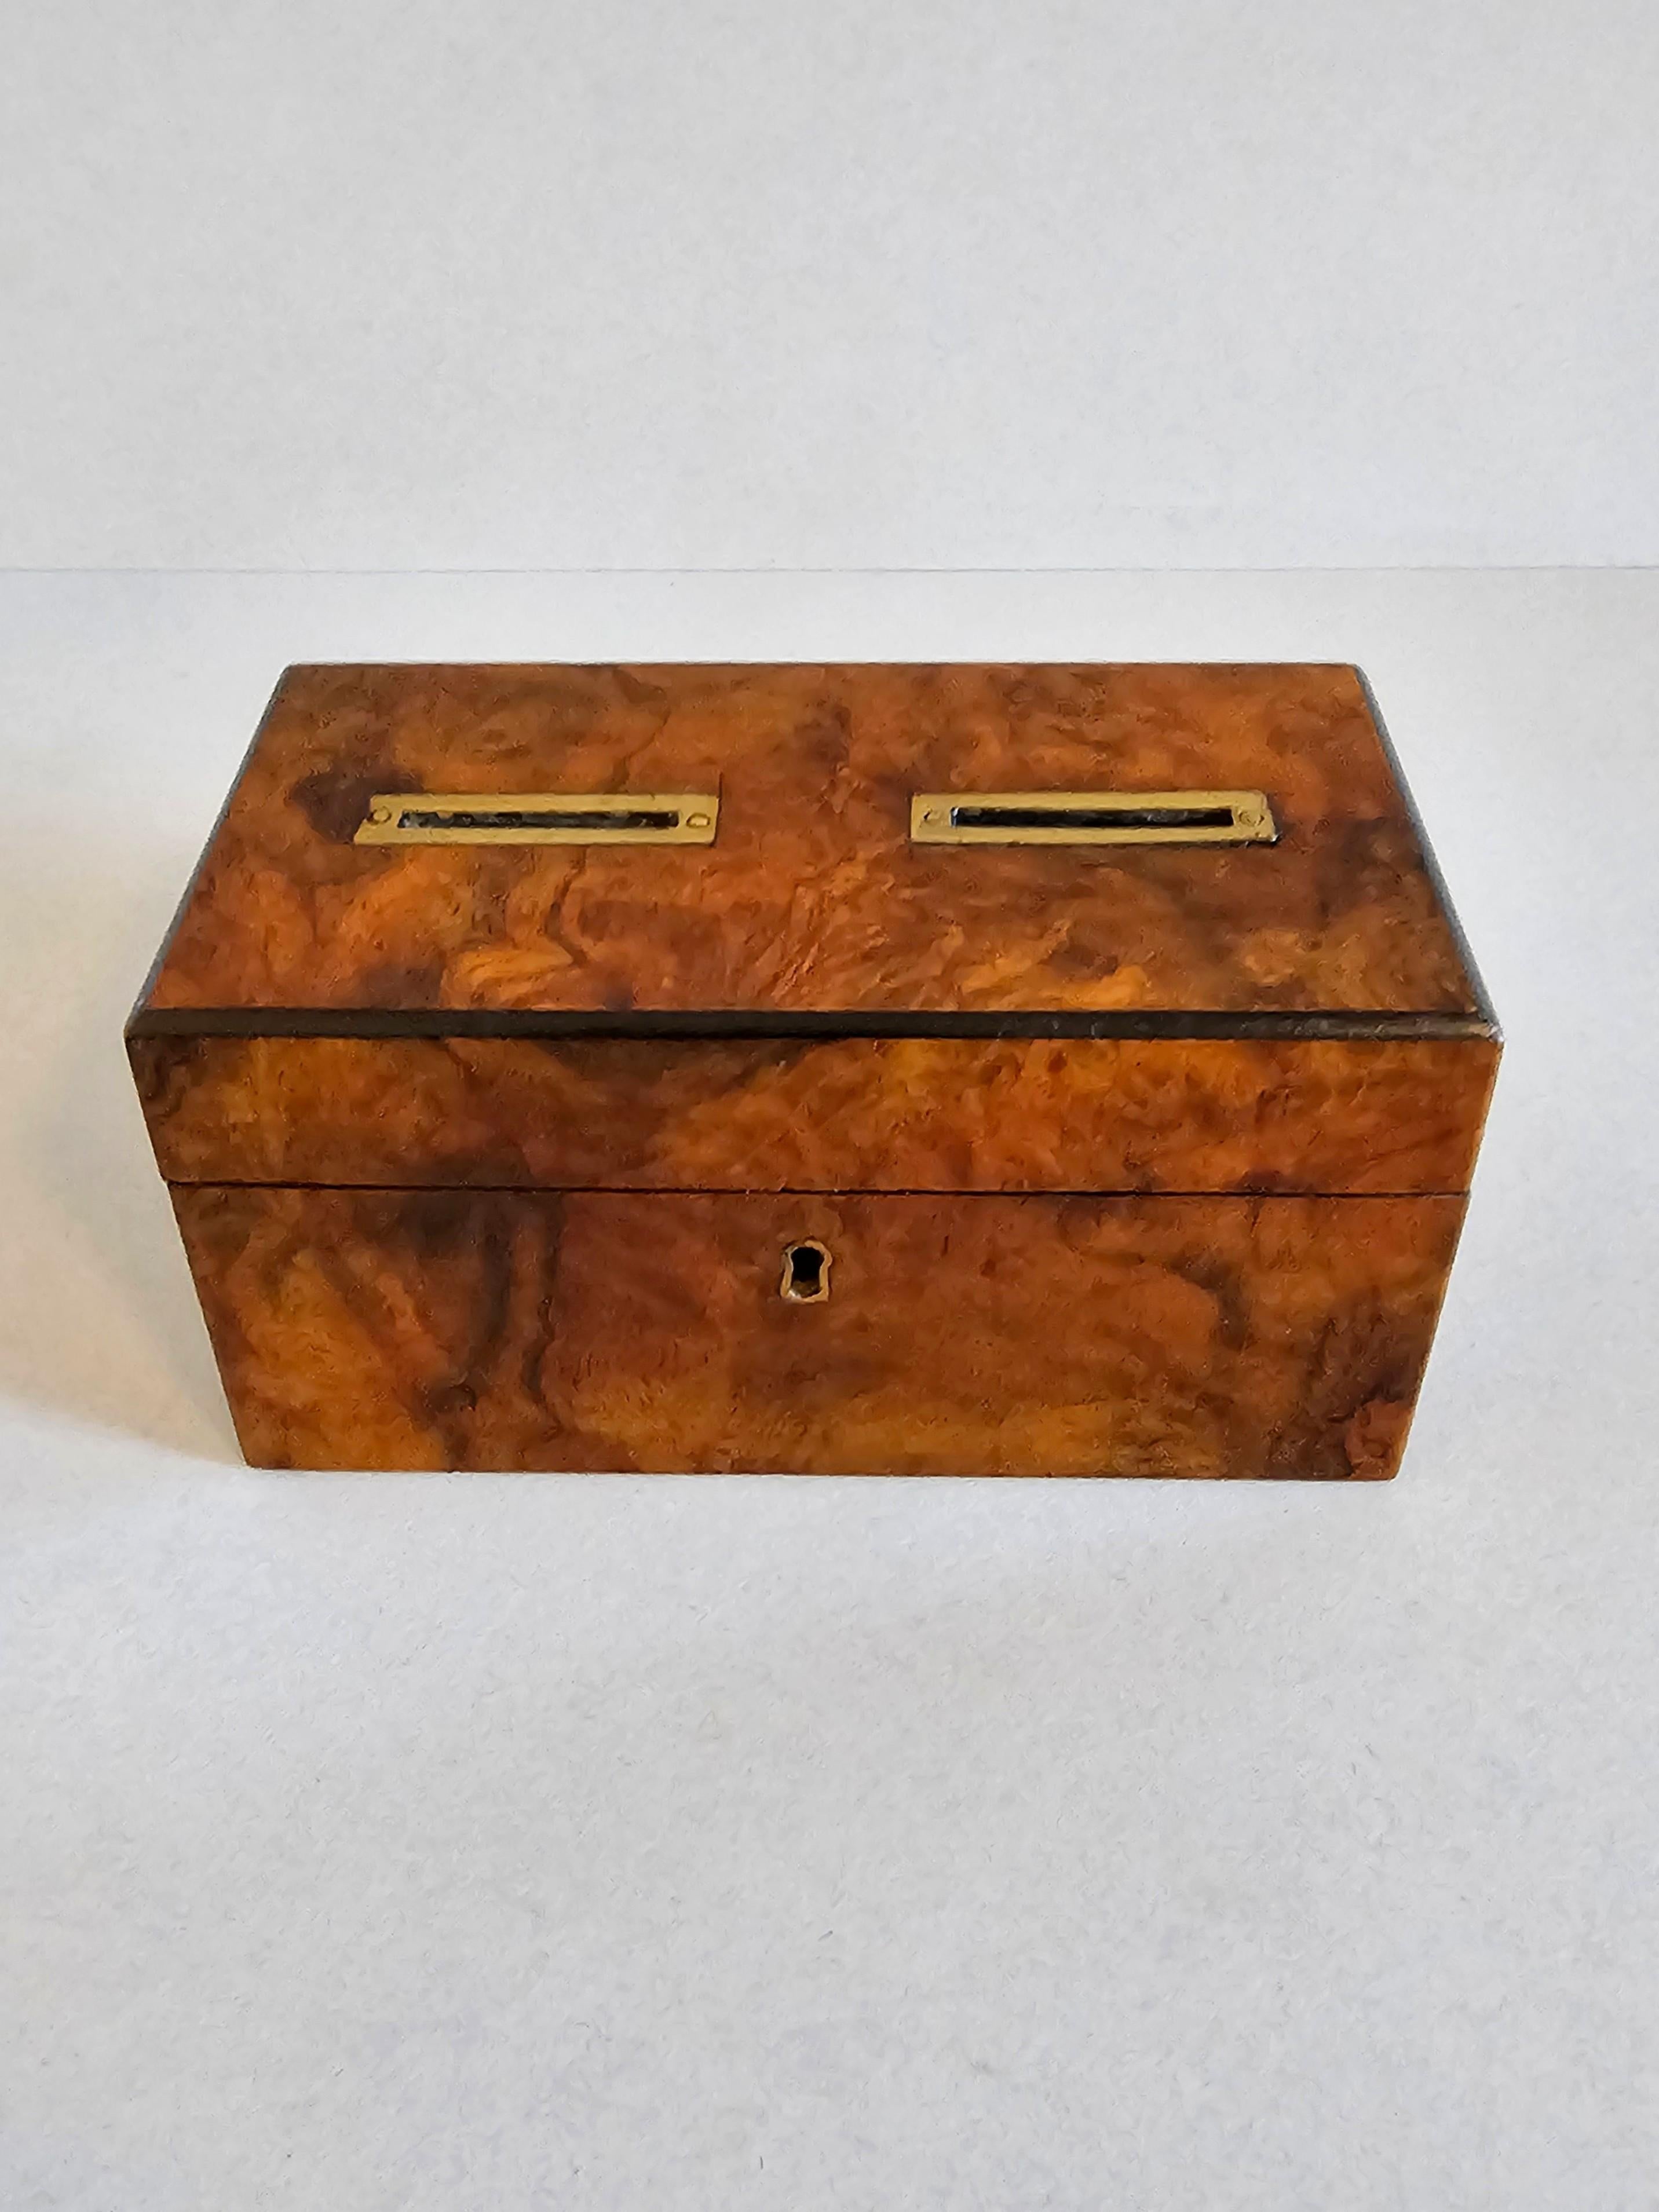 A stunning and scarce antique English Victorian era burlwood voting box.

Hand-crafted in the 19th century, the small table box having a rectangular case with hinged lid top fitted with two brass slots, the exterior finished in warm rich highly